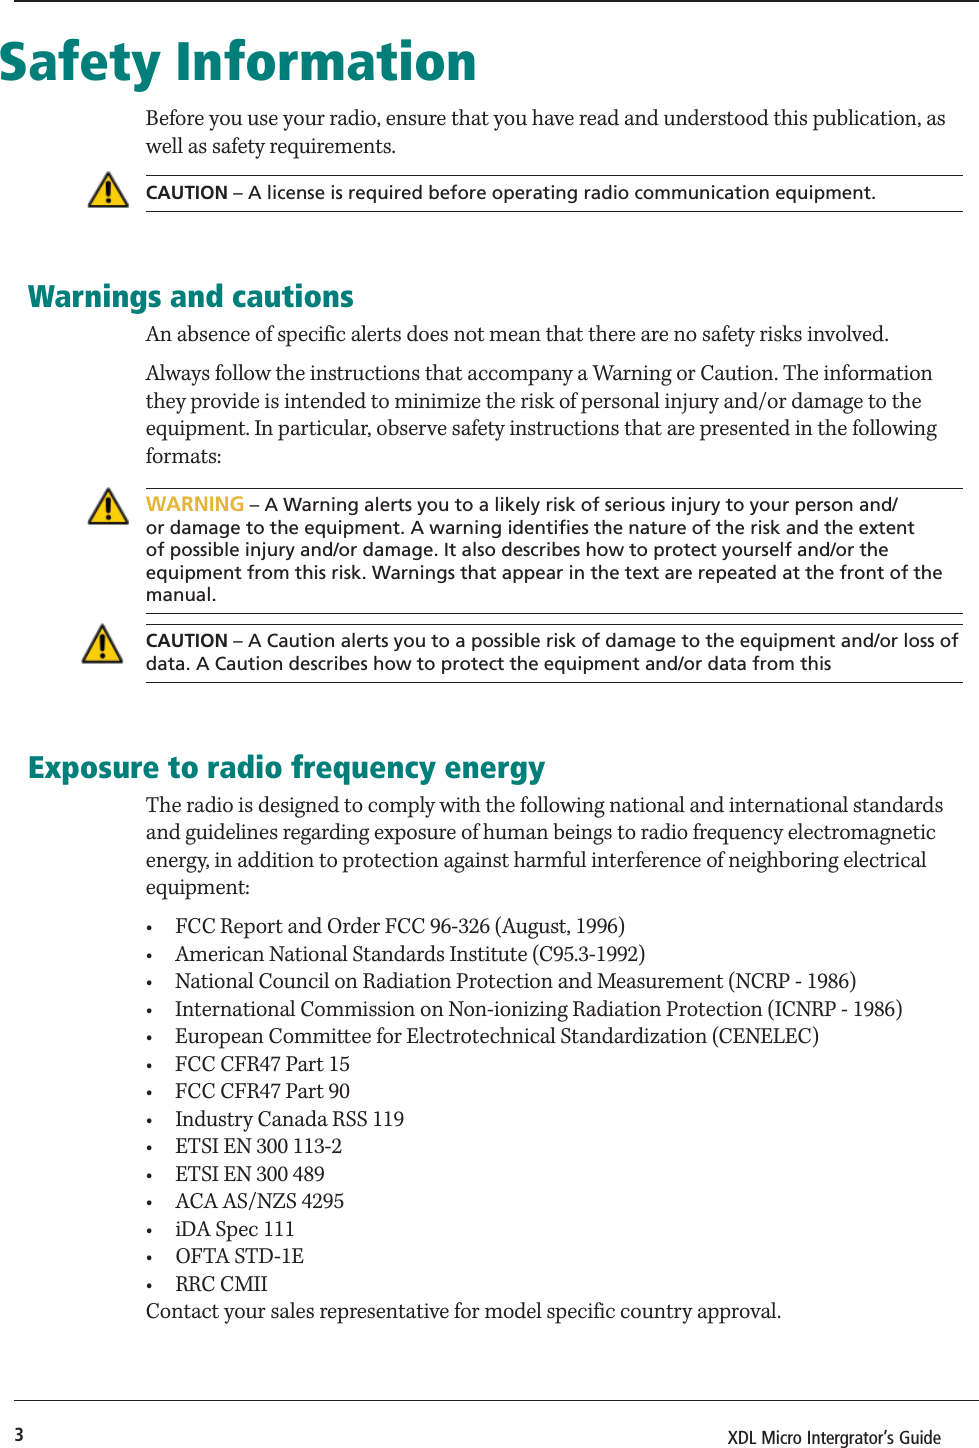 3XDL Micro Intergrator’s Guide Safety InformationBefore you use your radio, ensure that you have read and understood this publication, as well as safety requirements.CAUTION – A license is required before operating radio communication equipment.Warnings and cautionsAn absence of specific alerts does not mean that there are no safety risks involved.Always follow the instructions that accompany a Warning or Caution. The information they provide is intended to minimize the risk of personal injury and/or damage to the equipment. In particular, observe safety instructions that are presented in the following formats:WARNING – A Warning alerts you to a likely risk of serious injury to your person and/or damage to the equipment. A warning identifies the nature of the risk and the extent of possible injury and/or damage. It also describes how to protect yourself and/or the equipment from this risk. Warnings that appear in the text are repeated at the front of the manual.CAUTION – A Caution alerts you to a possible risk of damage to the equipment and/or loss of data. A Caution describes how to protect the equipment and/or data from thisExposure to radio frequency energyThe radio is designed to comply with the following national and international standards and guidelines regarding exposure of human beings to radio frequency electromagnetic energy, in addition to protection against harmful interference of neighboring electrical equipment:•  FCC Report and Order FCC 96-326 (August, 1996)•  American National Standards Institute (C95.3-1992)•  National Council on Radiation Protection and Measurement (NCRP - 1986)•  International Commission on Non-ionizing Radiation Protection (ICNRP - 1986)•  European Committee for Electrotechnical Standardization (CENELEC)•  FCC CFR47 Part 15•  FCC CFR47 Part 90•  Industry Canada RSS 119•  ETSI EN 300 113-2•  ETSI EN 300 489•  ACA AS/NZS 4295•  iDA Spec 111• OFTA STD-1E• RRC CMIIContact your sales representative for model specific country approval.